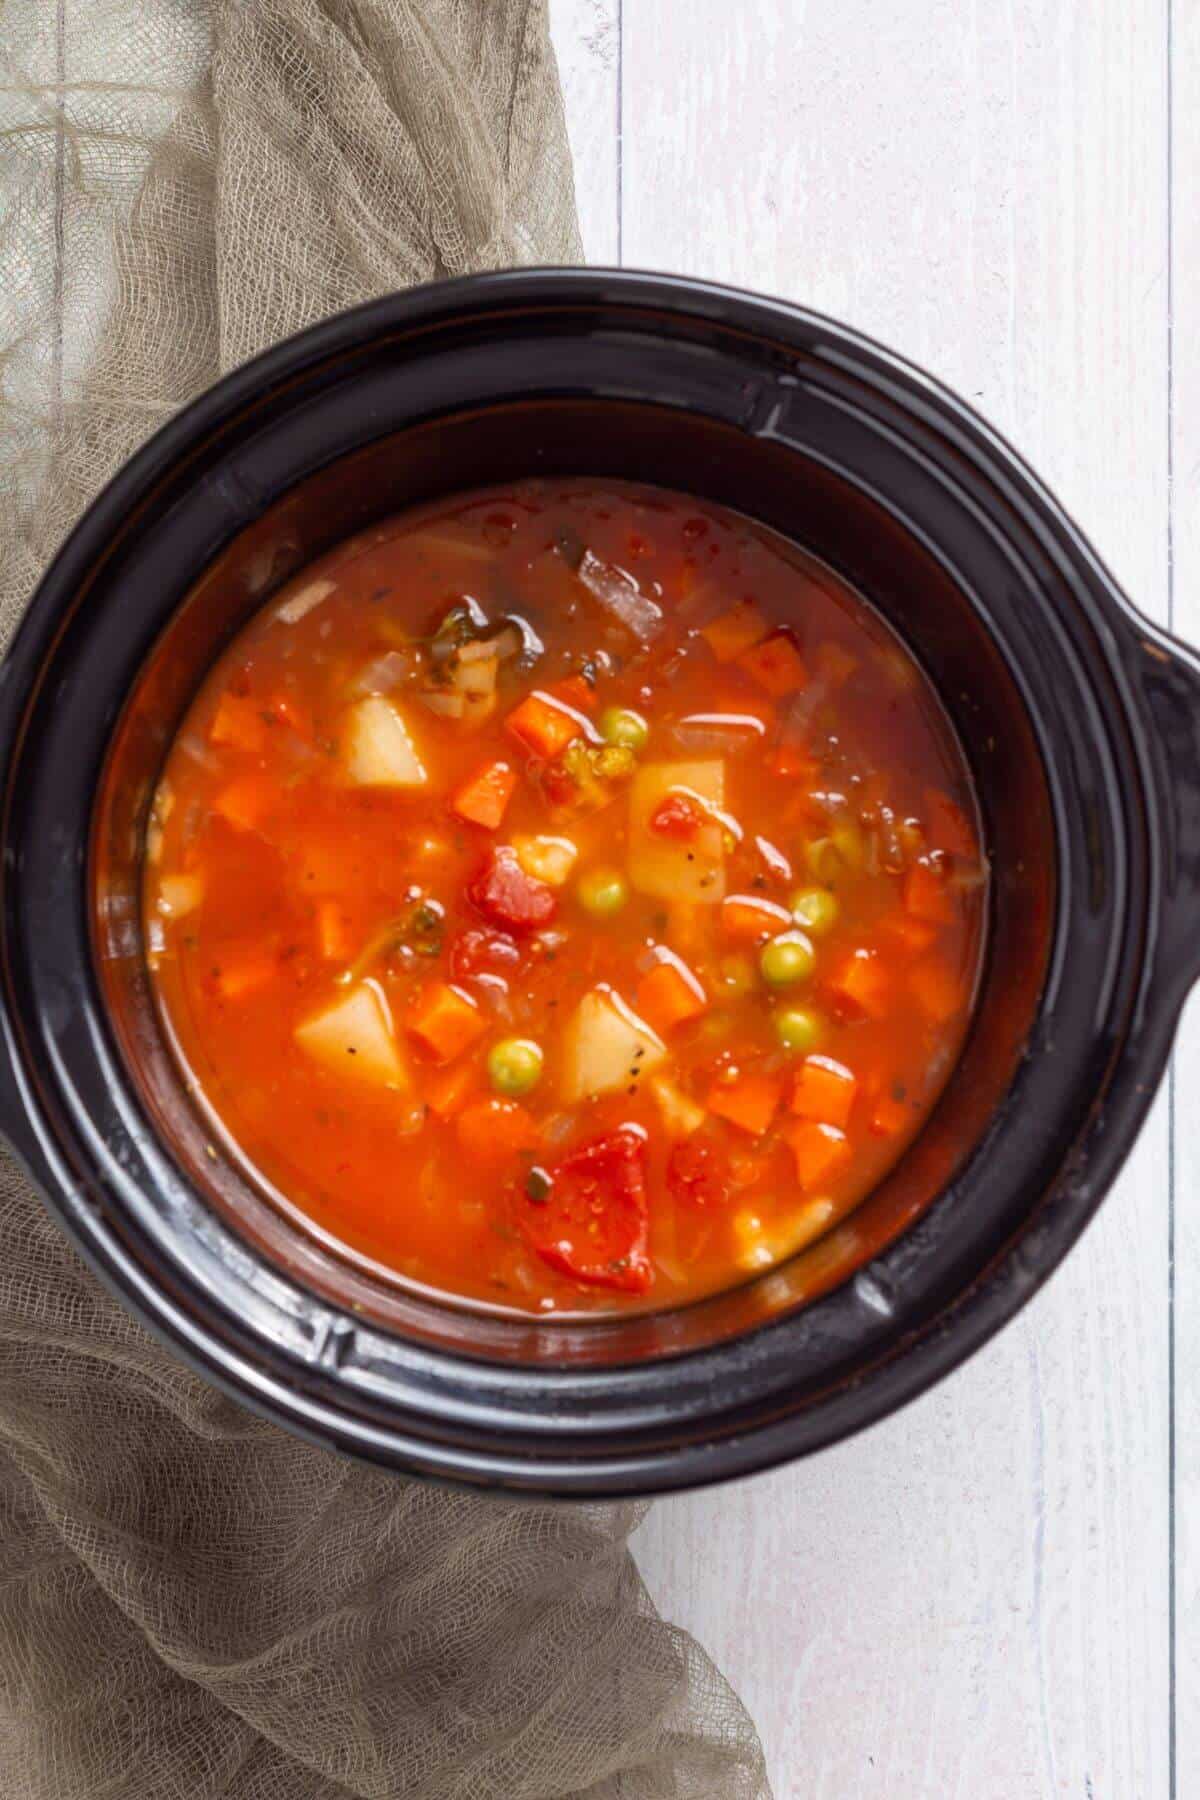 A crock pot of vegetable soup on a wooden table.